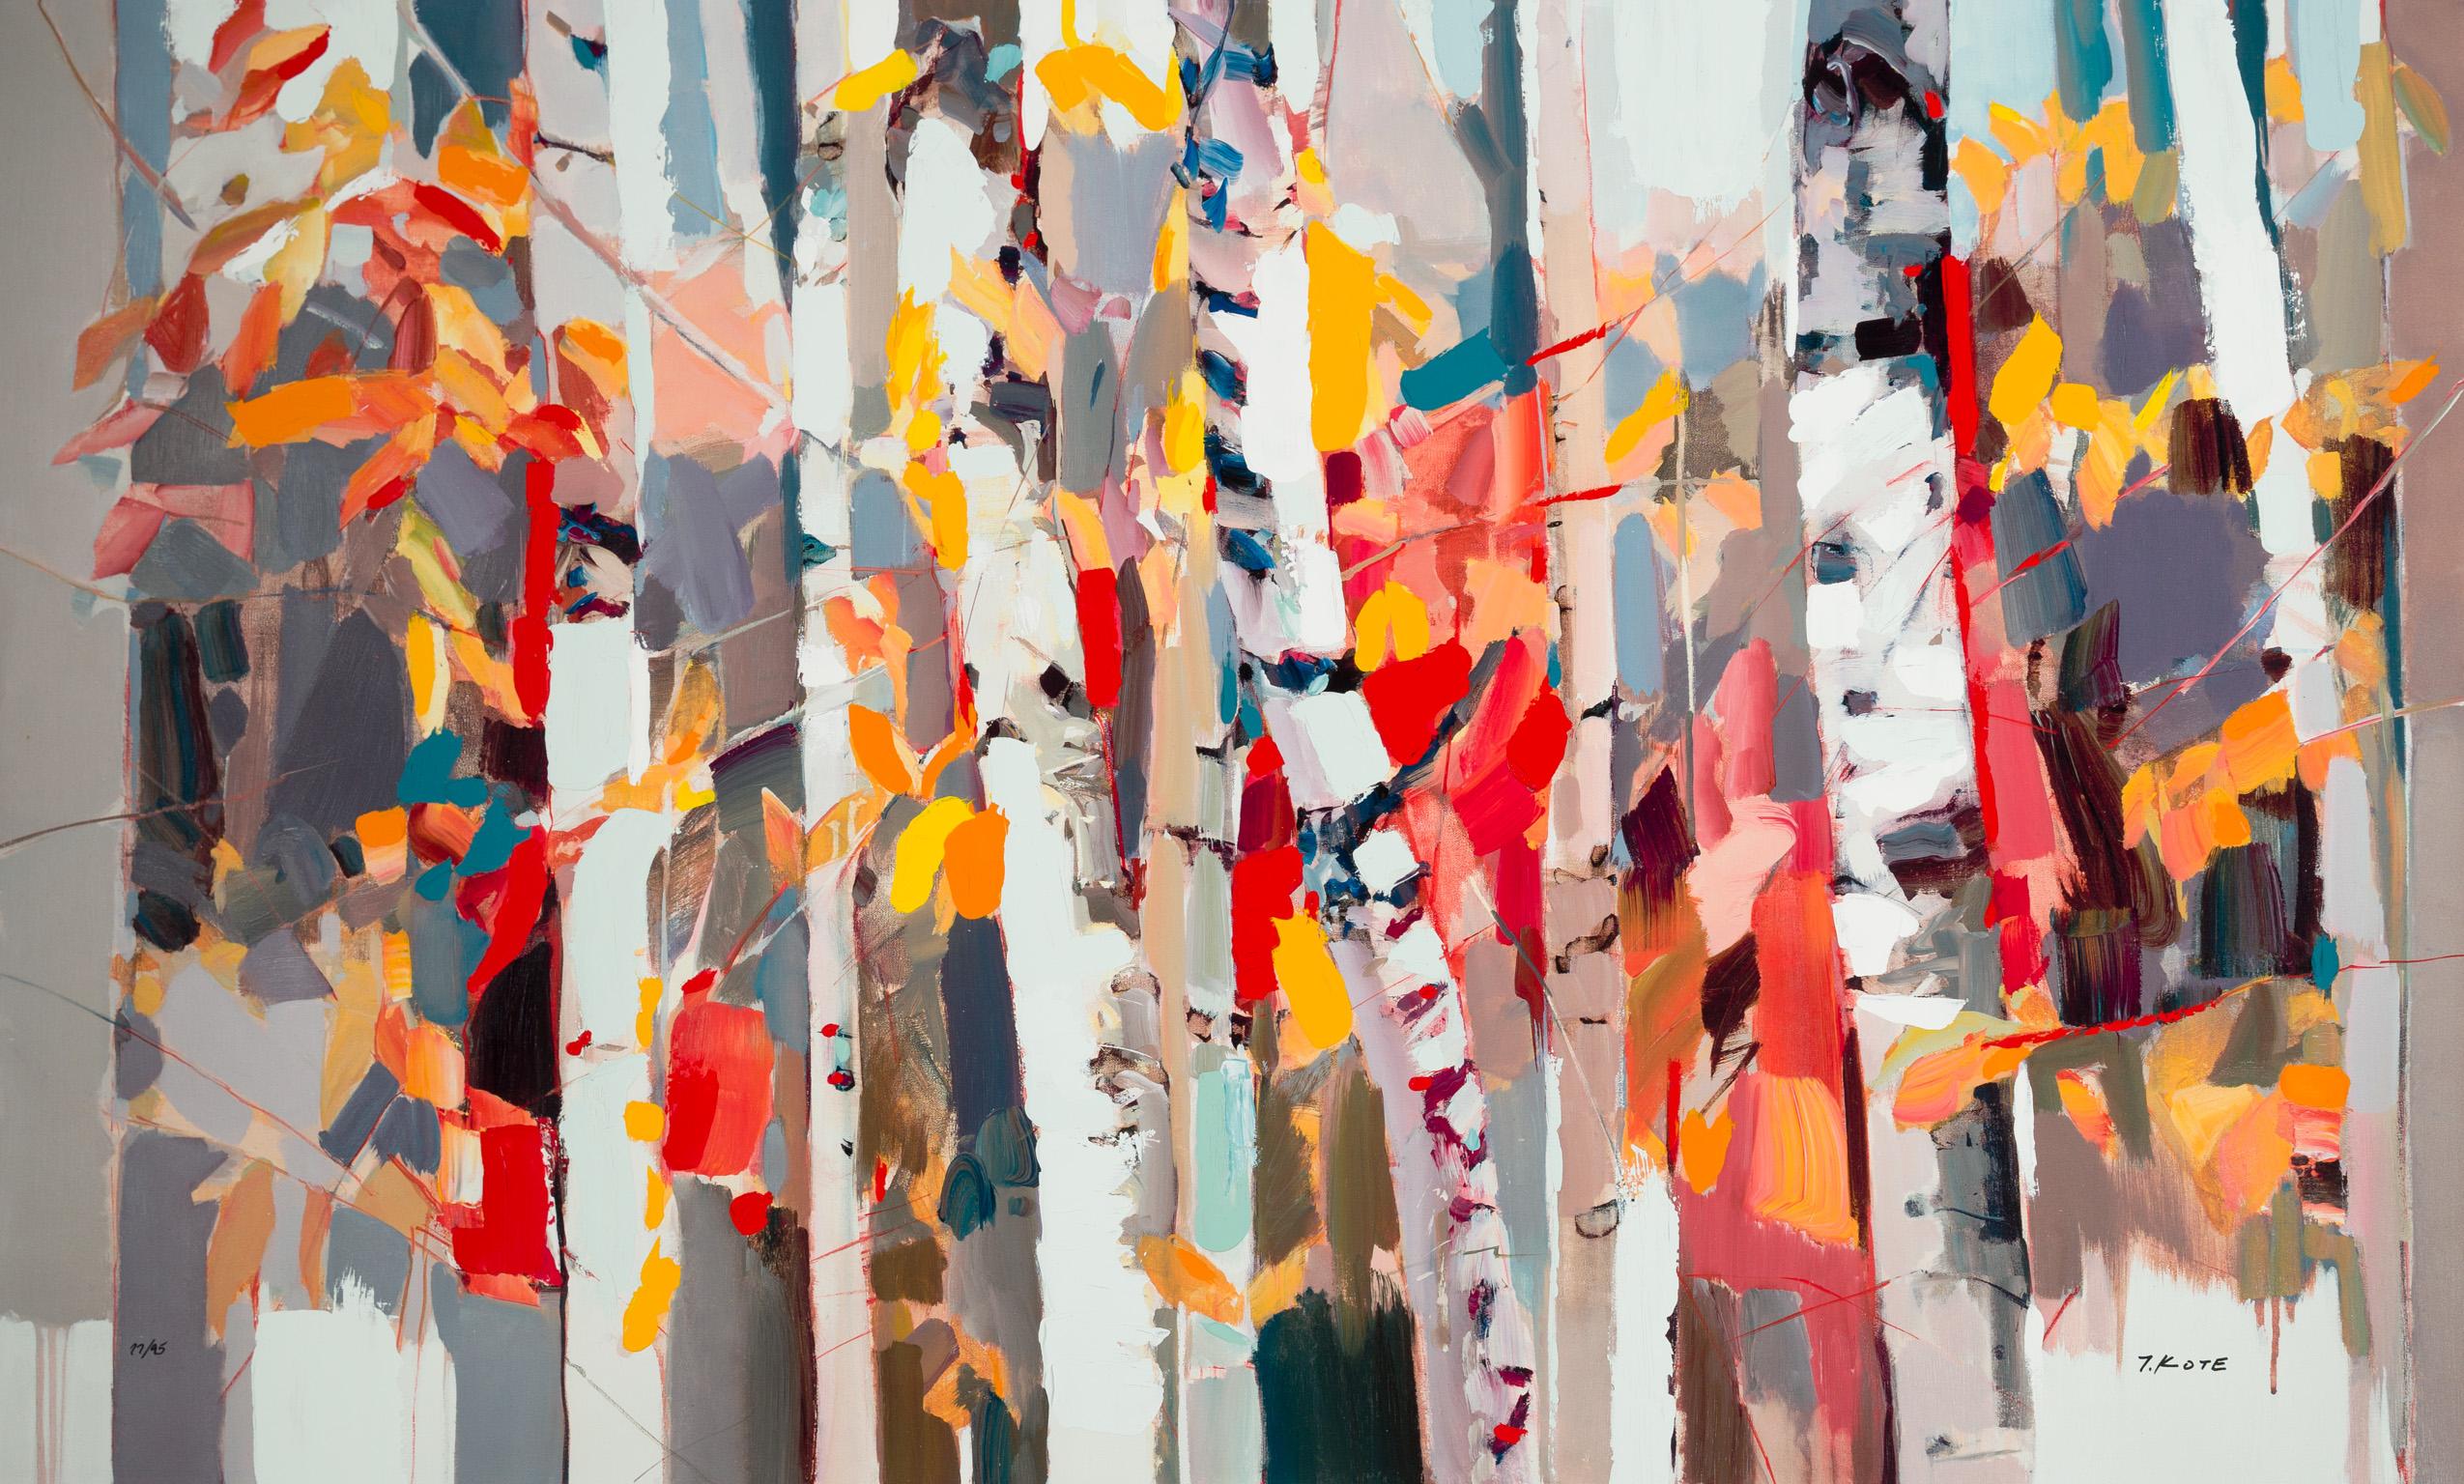 Josef Kote Landscape Painting - "Changing Seasons" Abstracted Birch Trees in Fall with Hand Embellishments